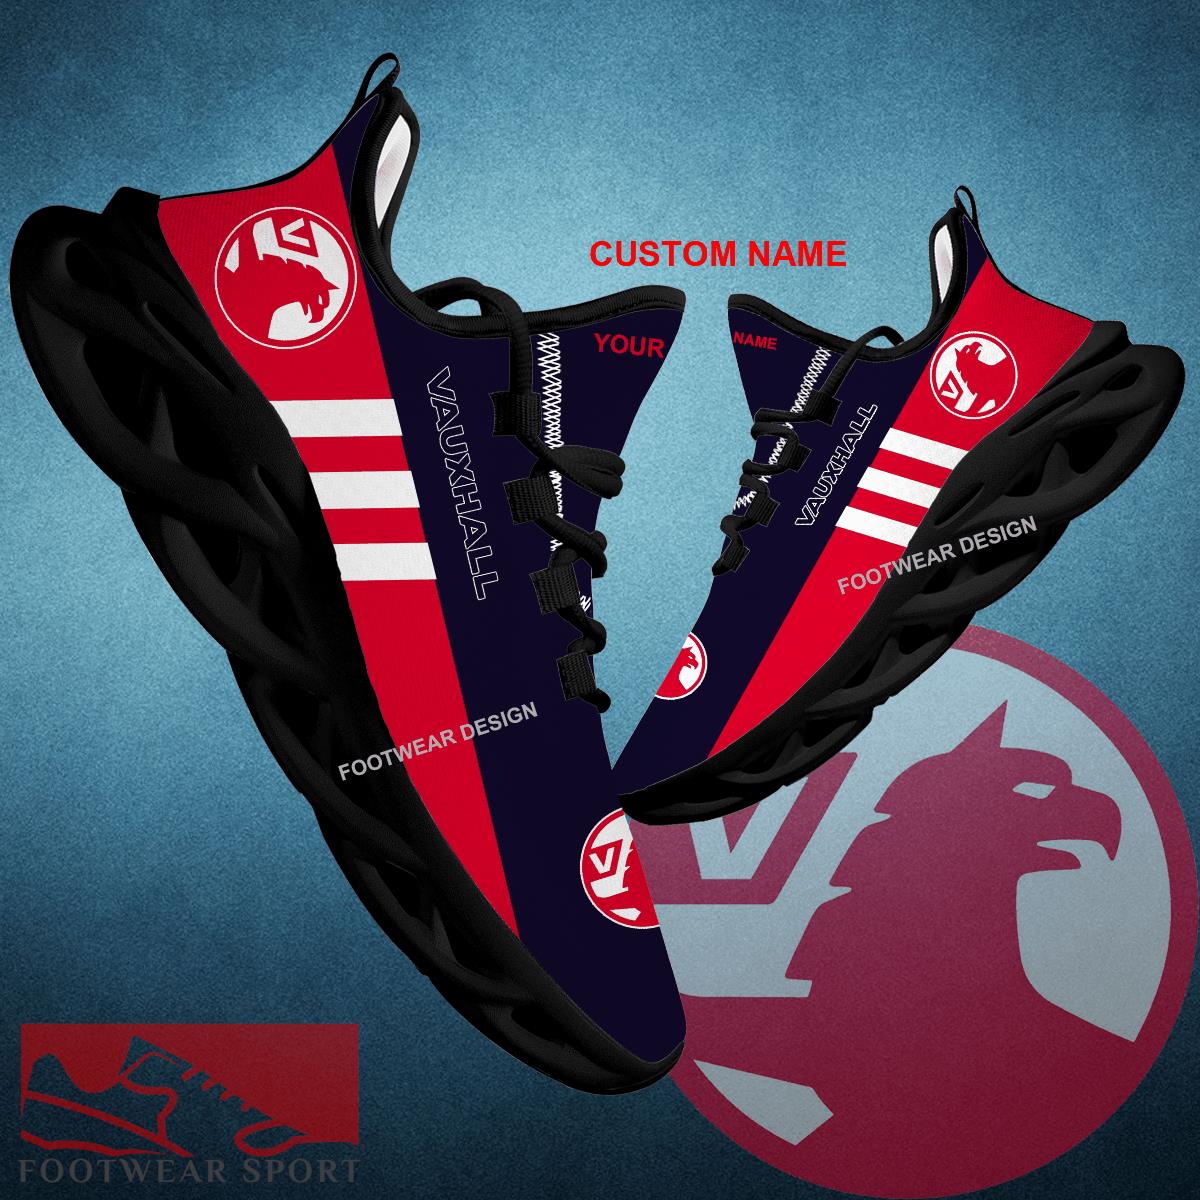 Car Racing Vauxhall Style Chunky Shoes New Design Gift Fans Max Soul Sneakers Personalized - Car Racing Vauxhall Logo New Style Chunky Shoes Photo 1